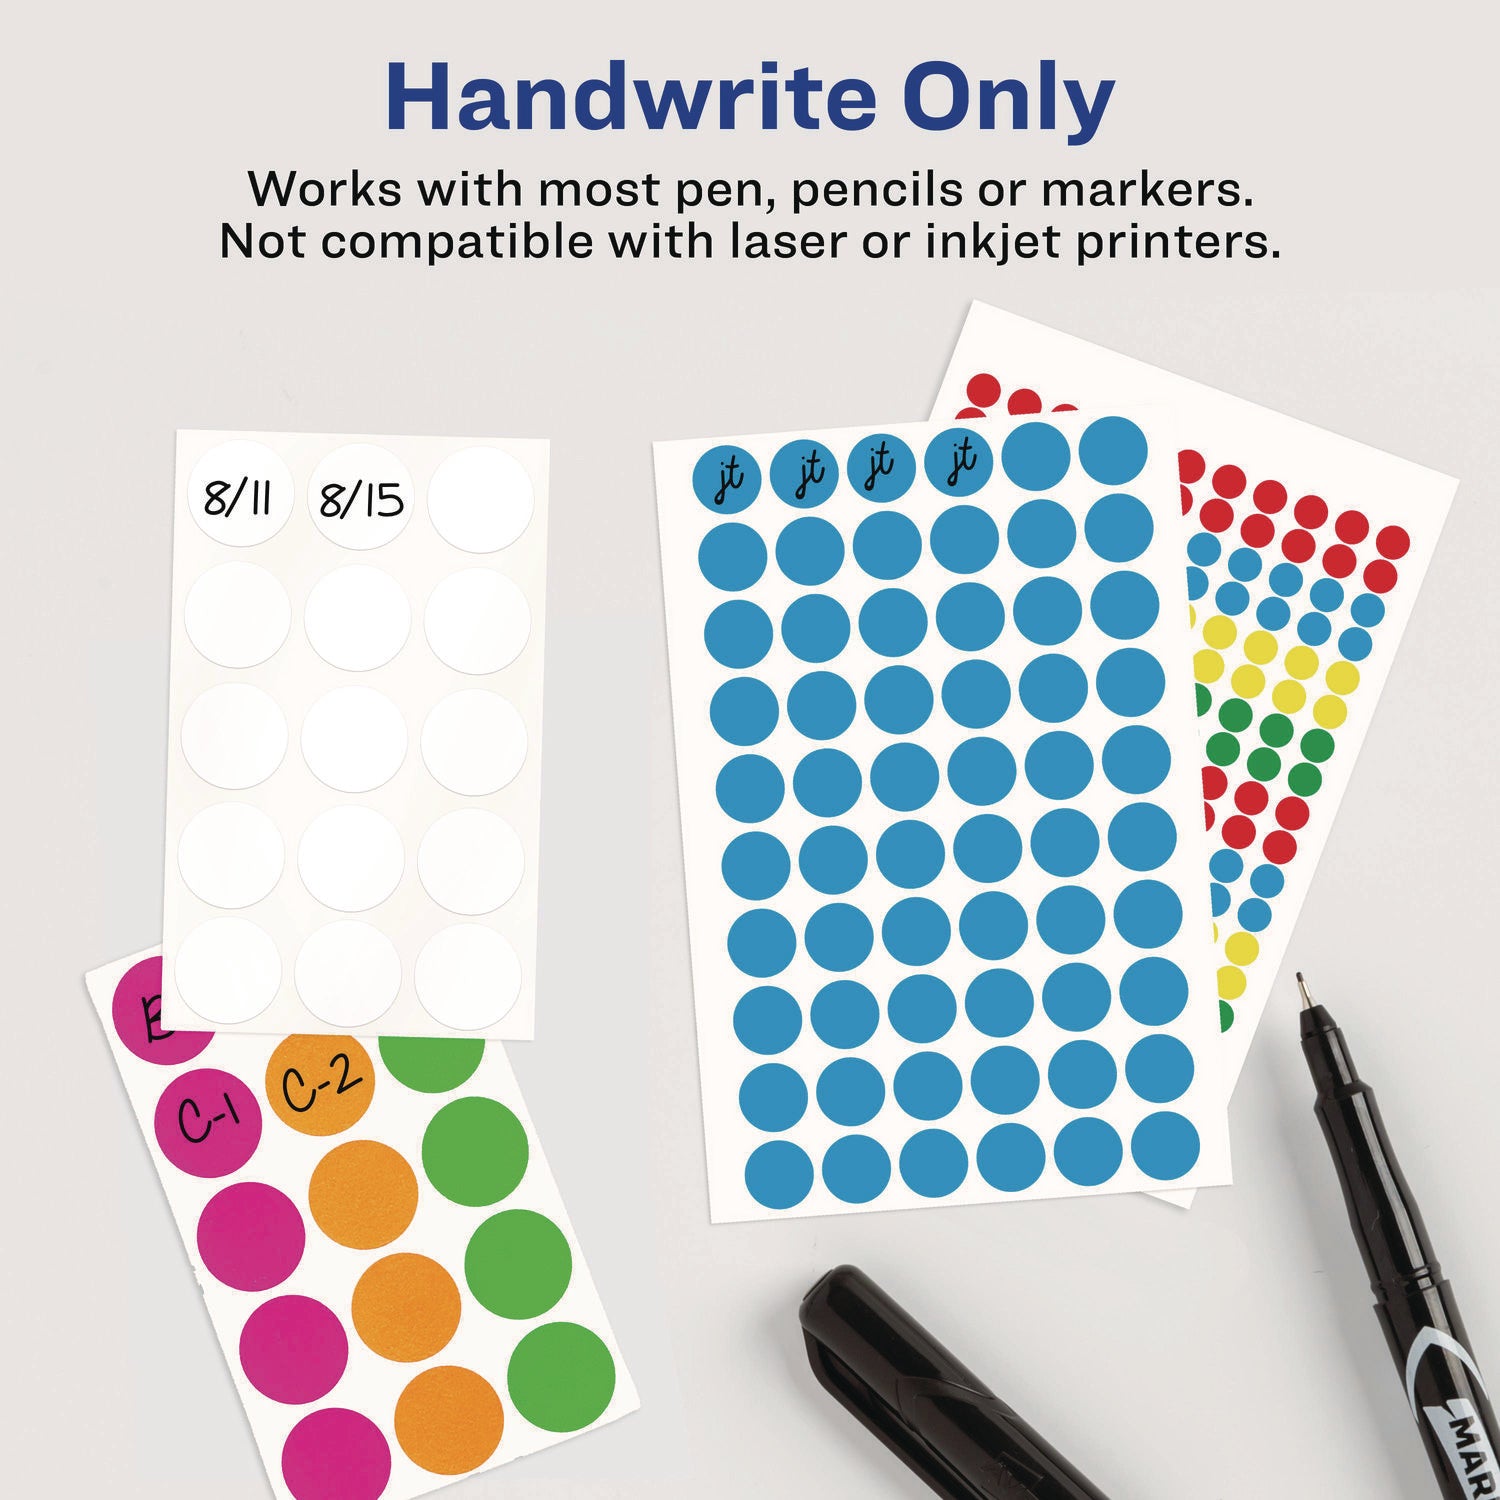 Handwrite-Only Self-Adhesive "See Through" Removable Round Color Dots, 0.75" dia, Assorted, 35/Sheet, 29 Sheets/Pack, (5473) - 